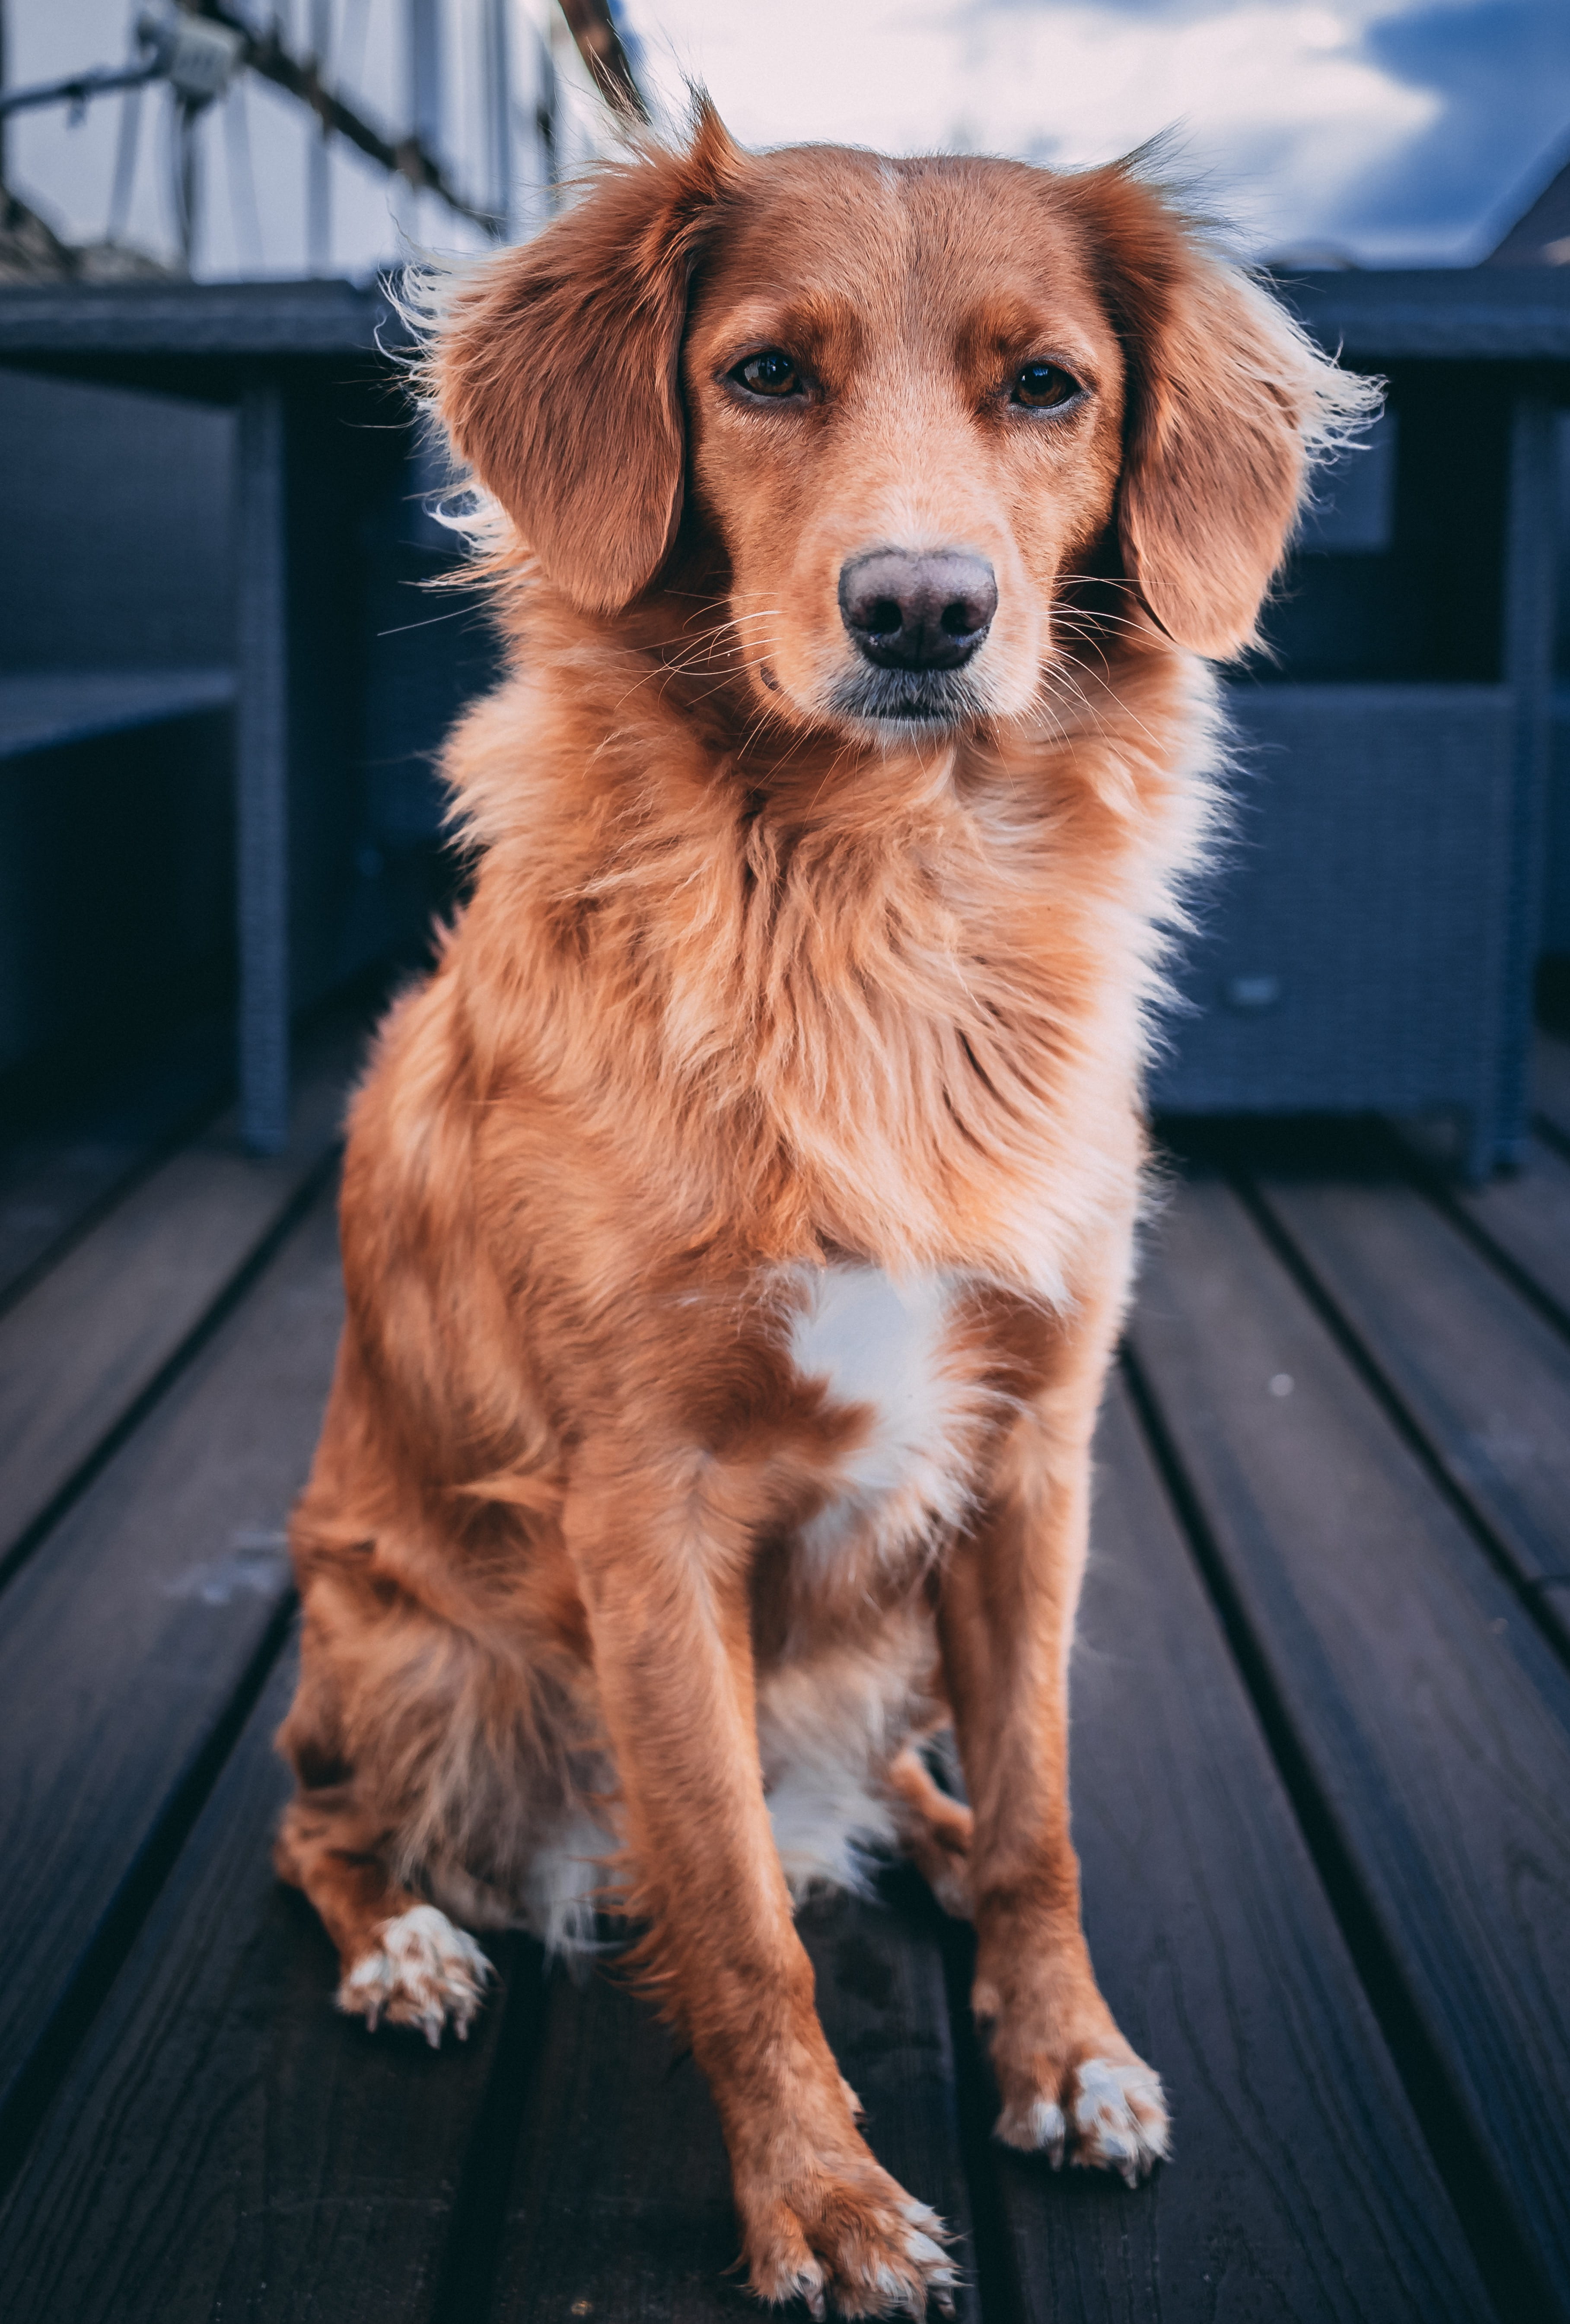 adult Nova Scotia duck tolling retriever sitting on brown wooden surface